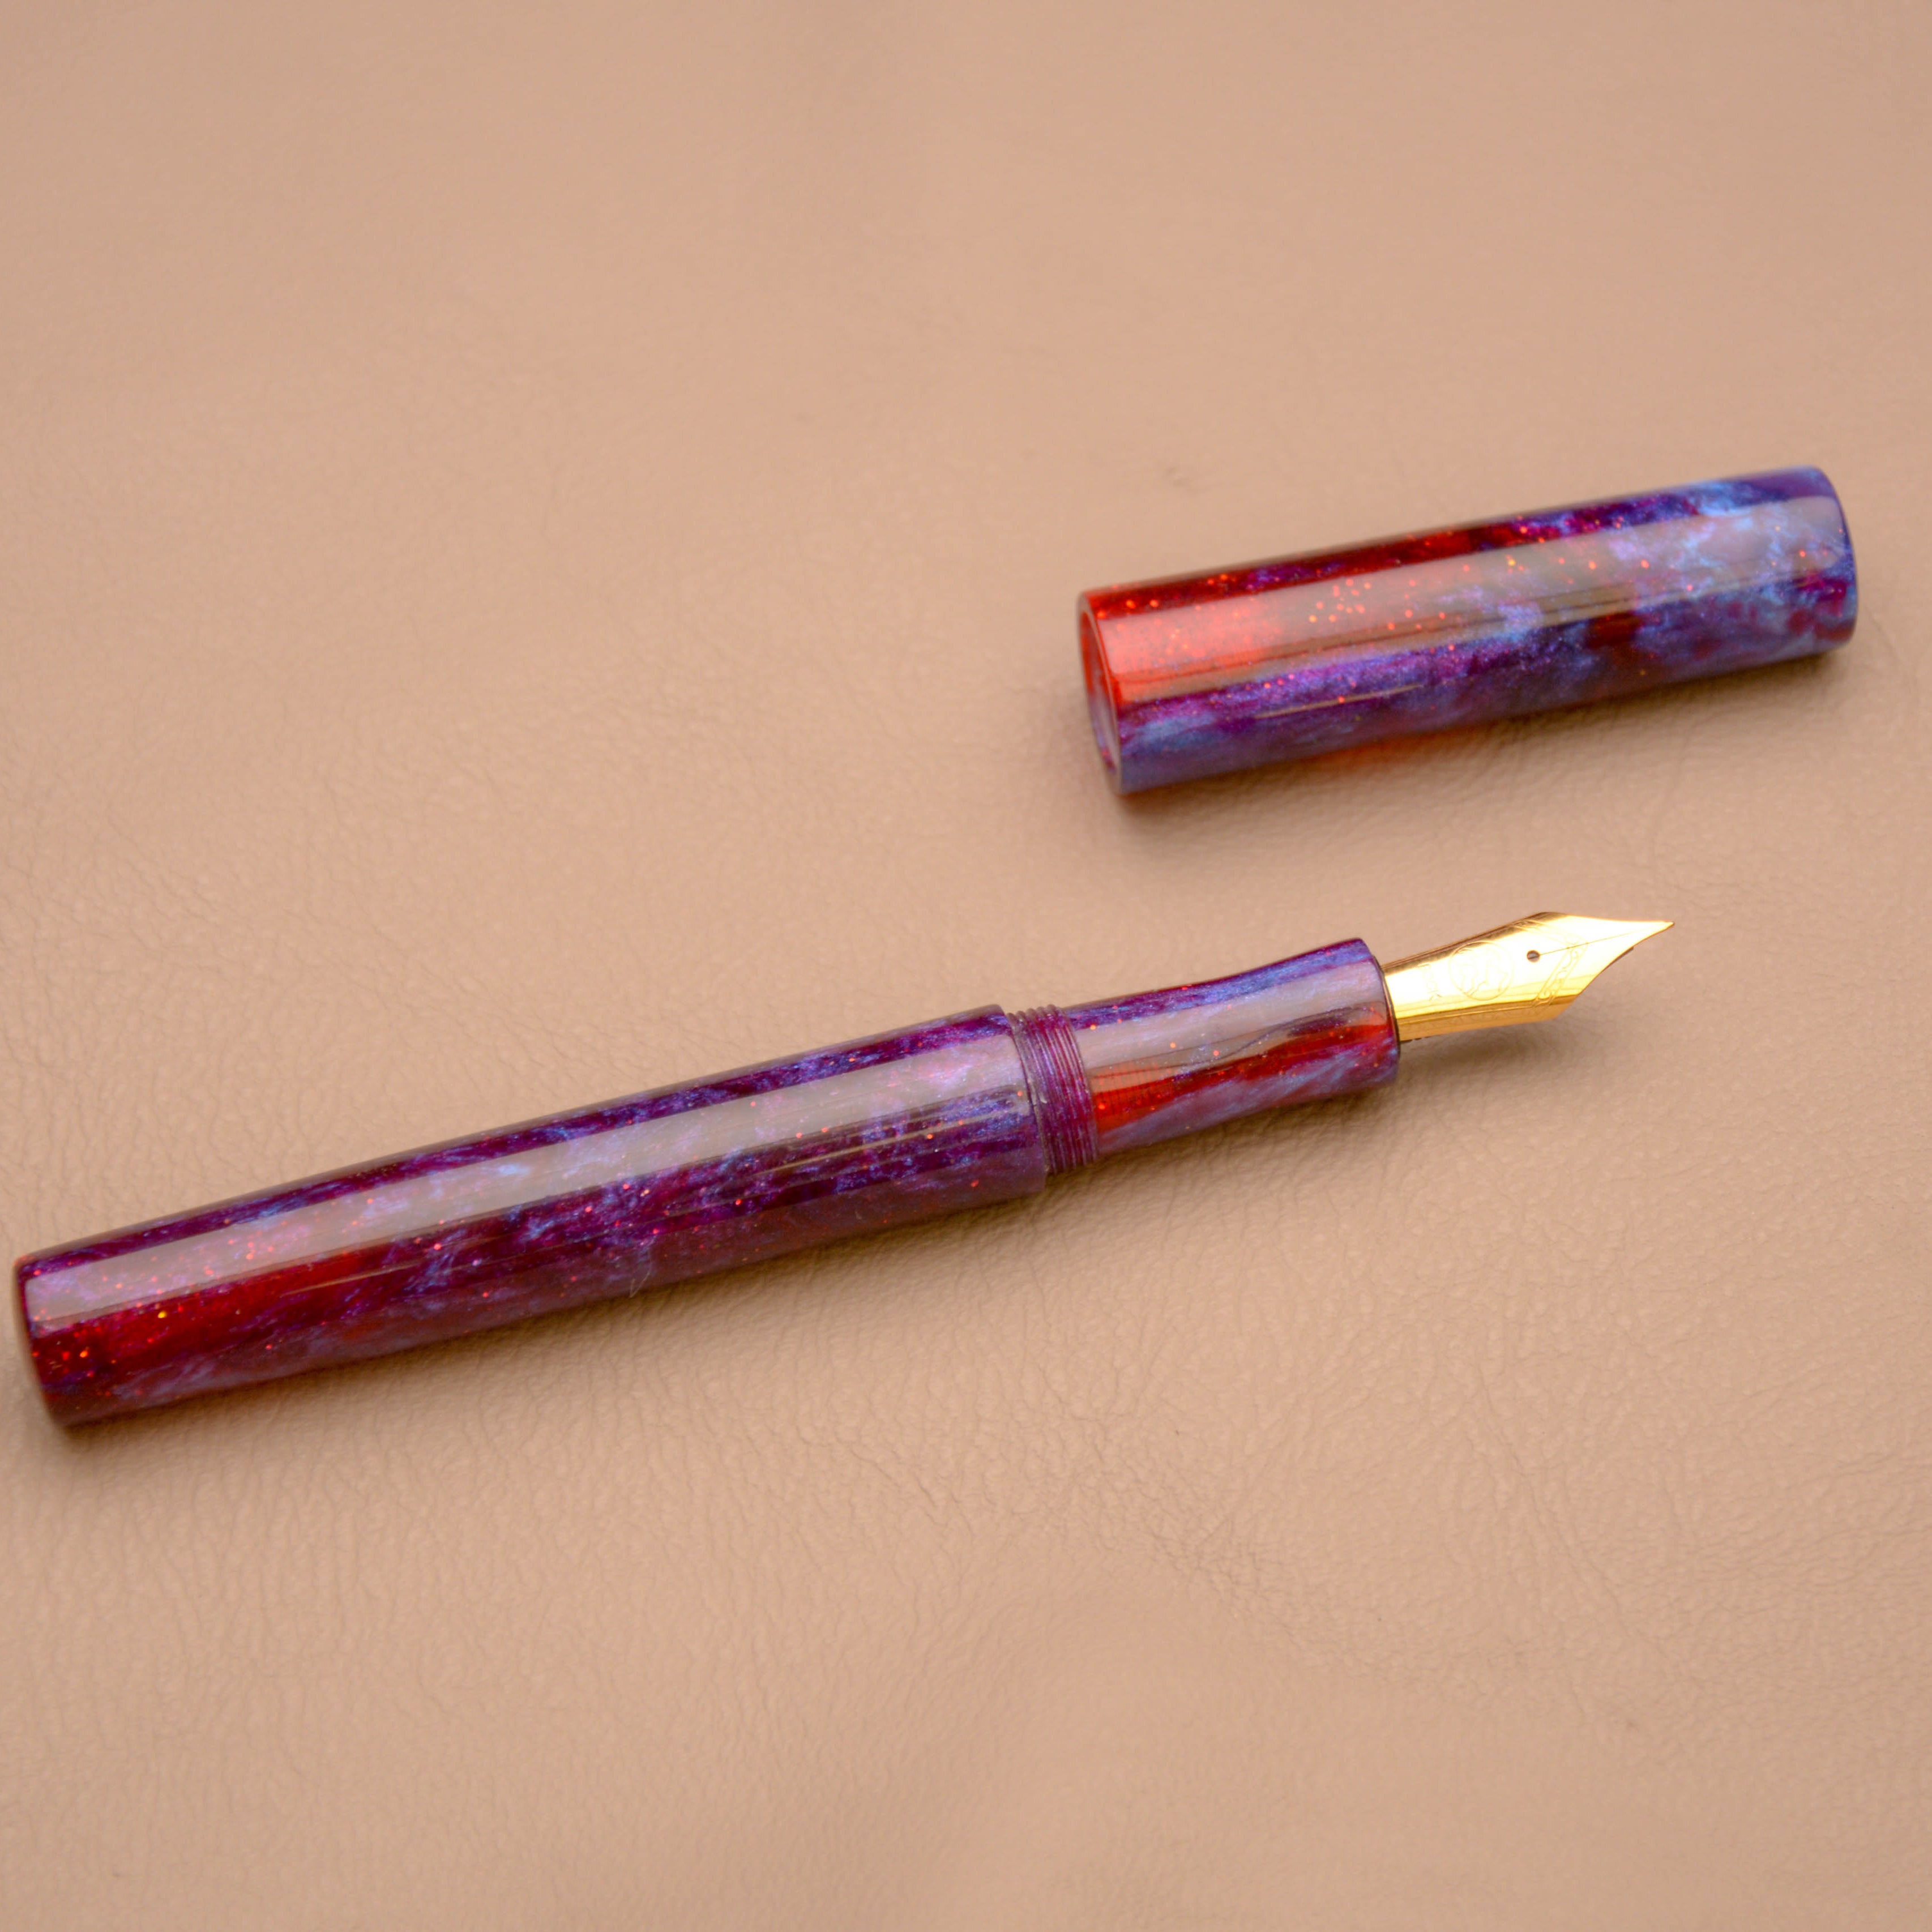 Fountain Pen - Bock #6 - 13 mm - In house cast with reds, purple and blue with glitters